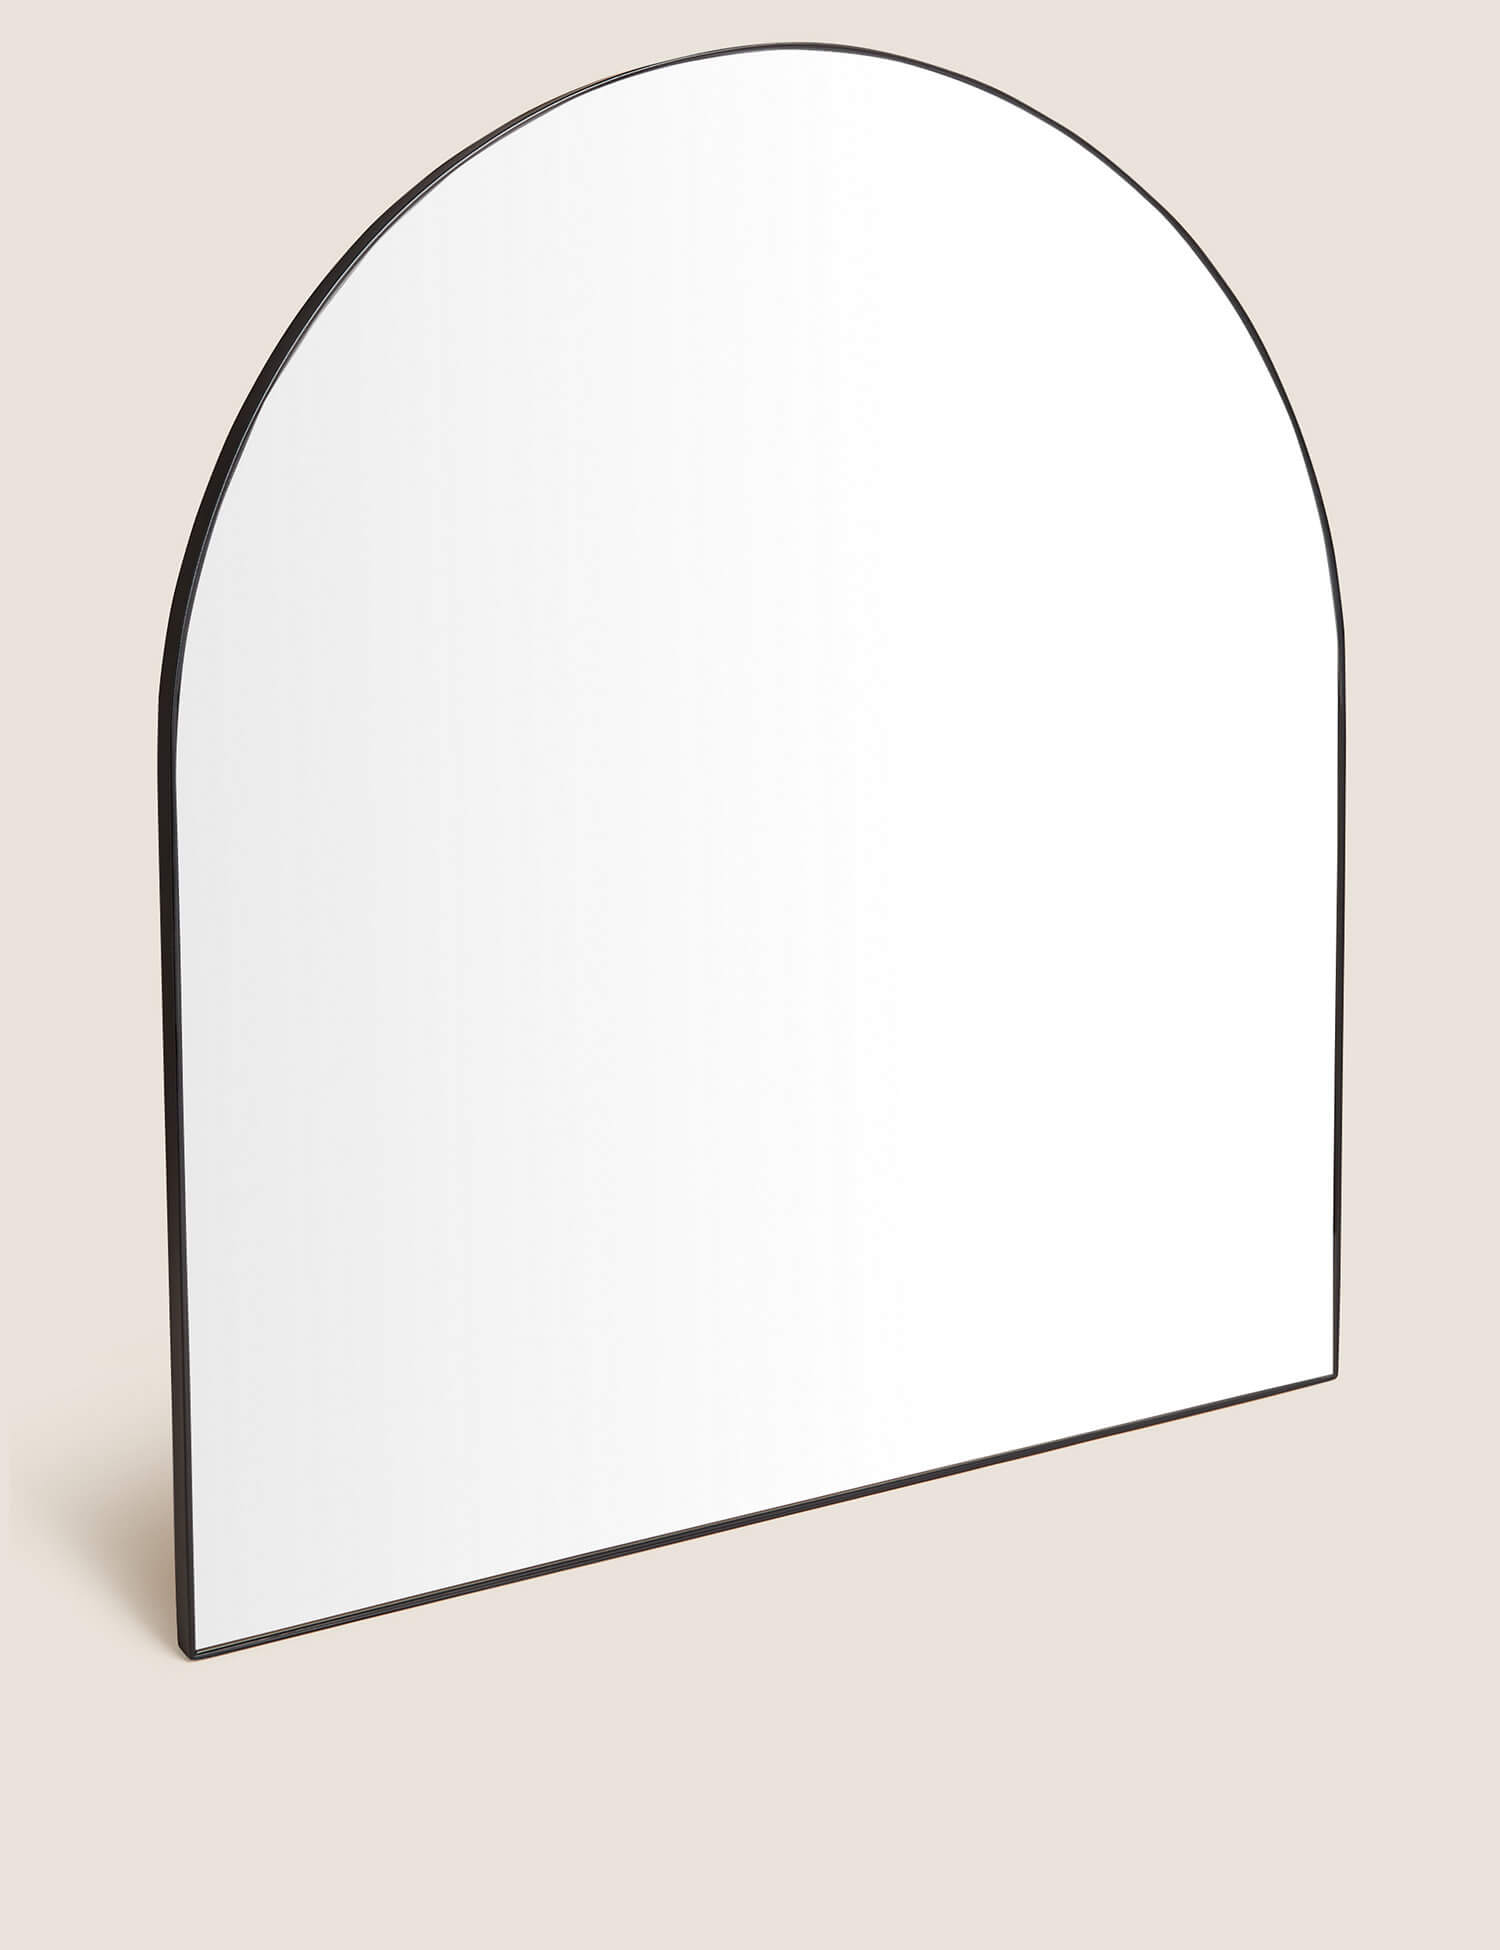 A short arched mirror.